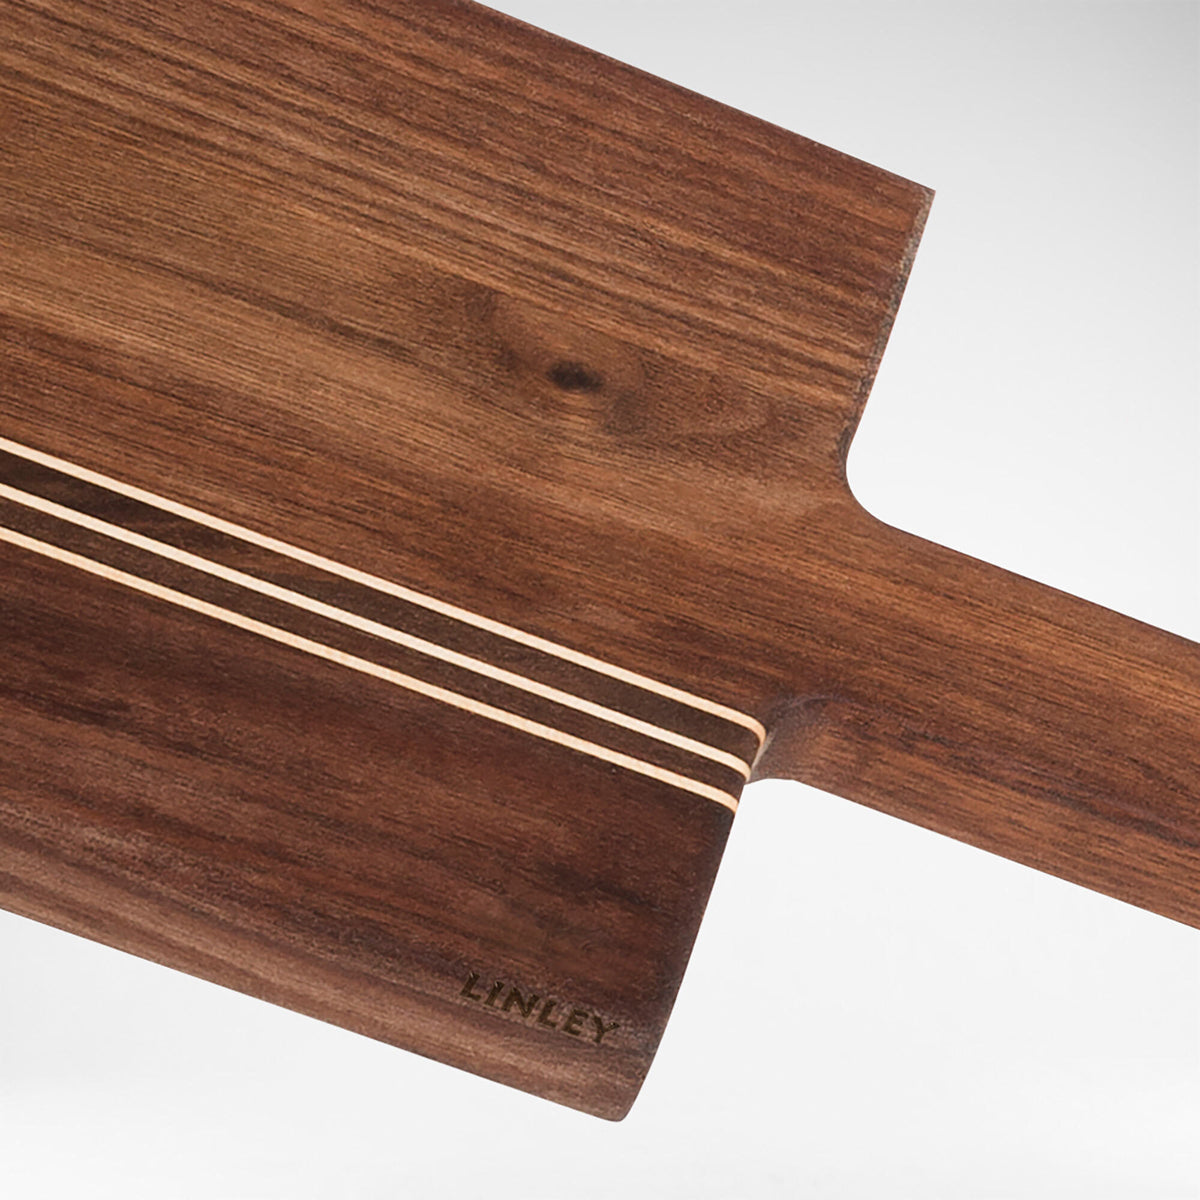 LINLEY Cuisine Serving Board | Luxury Home Accessories & Gifts | LINLEY